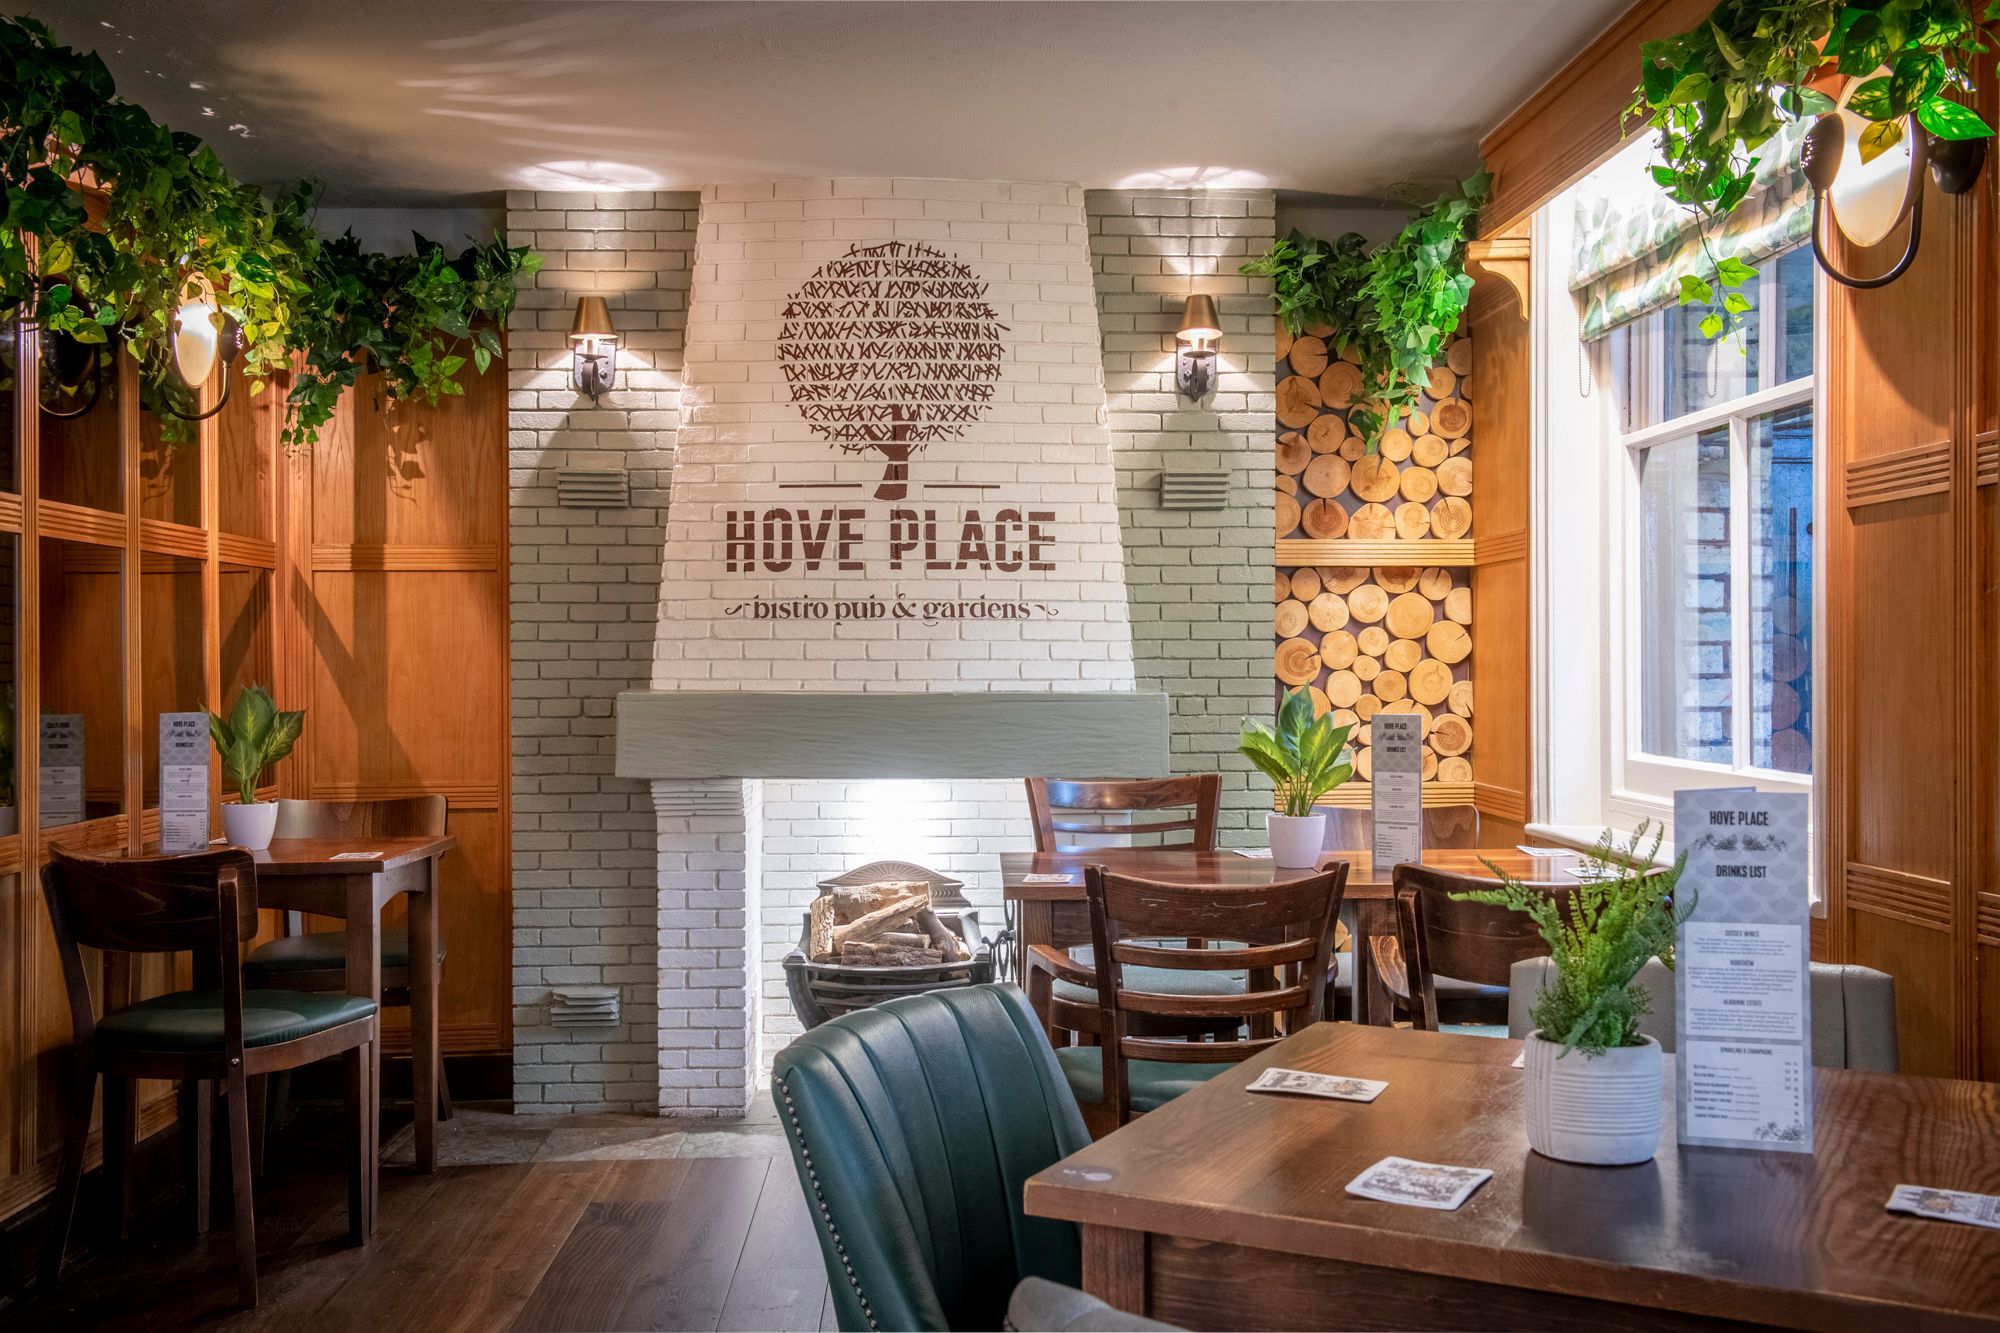 fire place made of white colored brickes with hove place logo